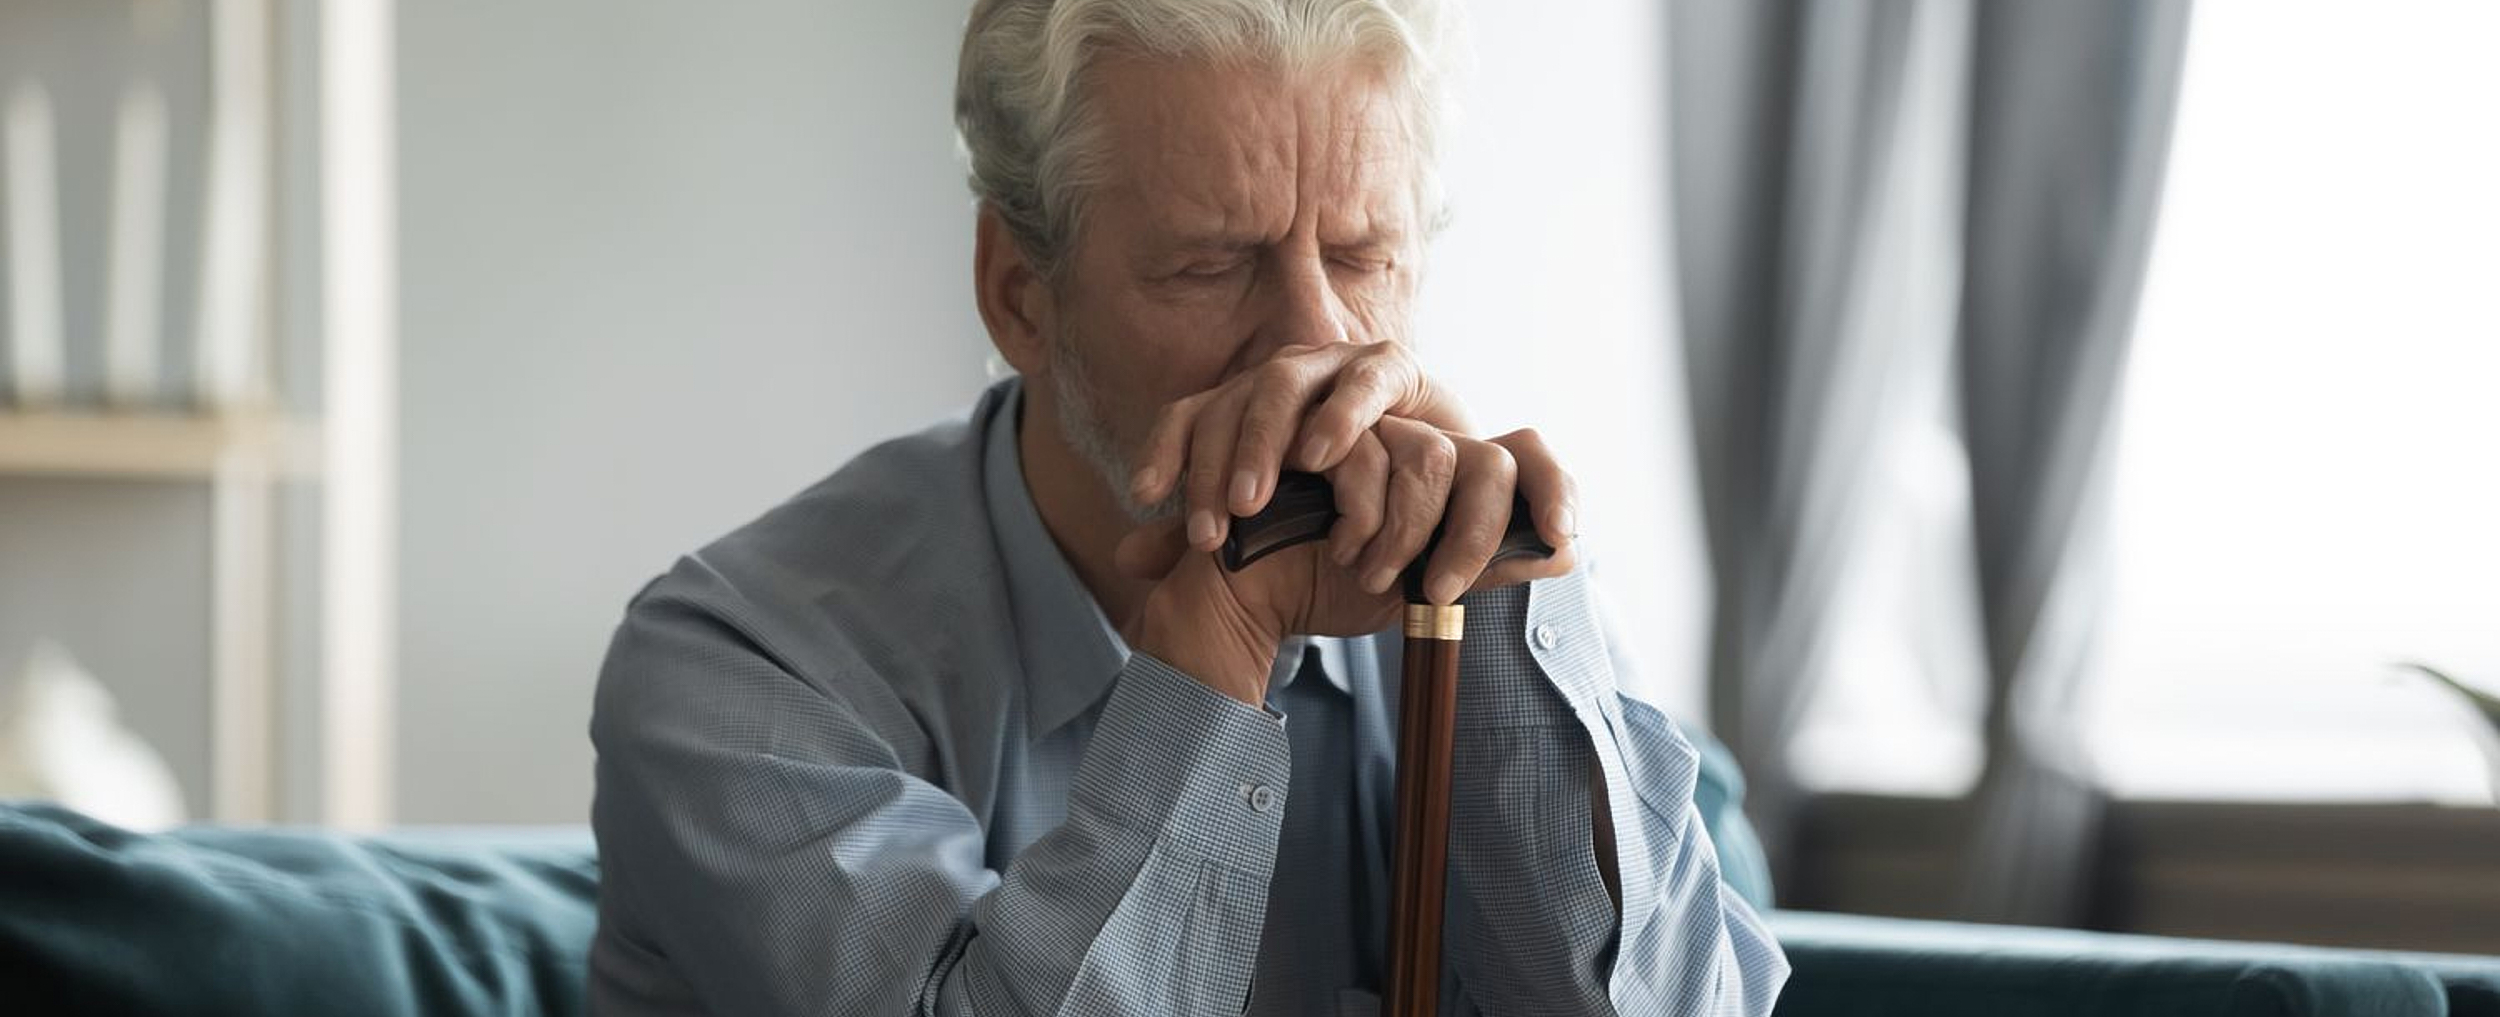 An elderly man with his brow furrowed in pain, holding a cane for support.